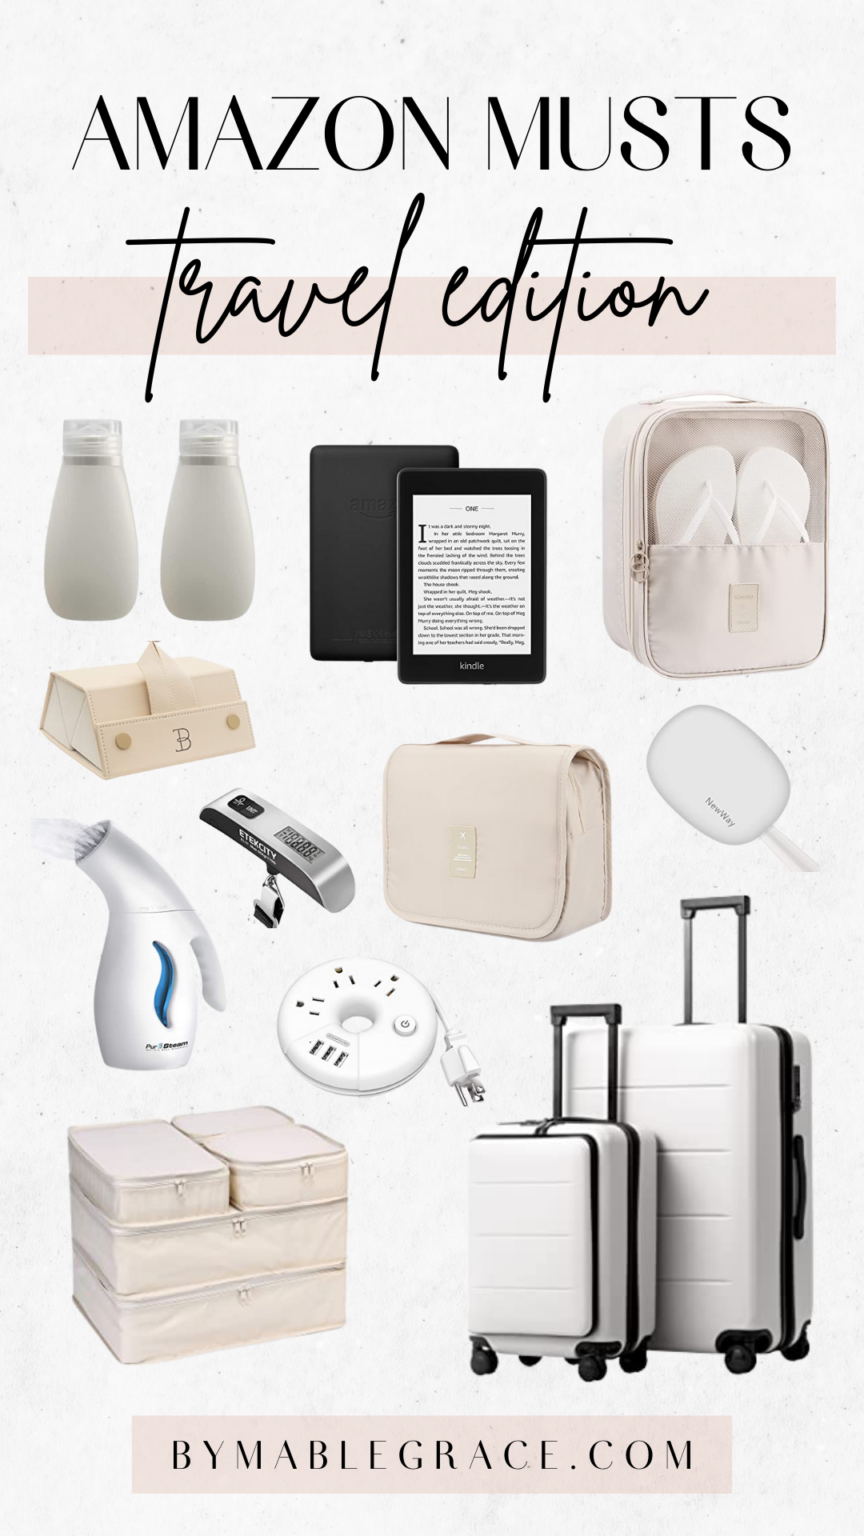 11 Must-Have Amazon Travel Essentials - by mable grace